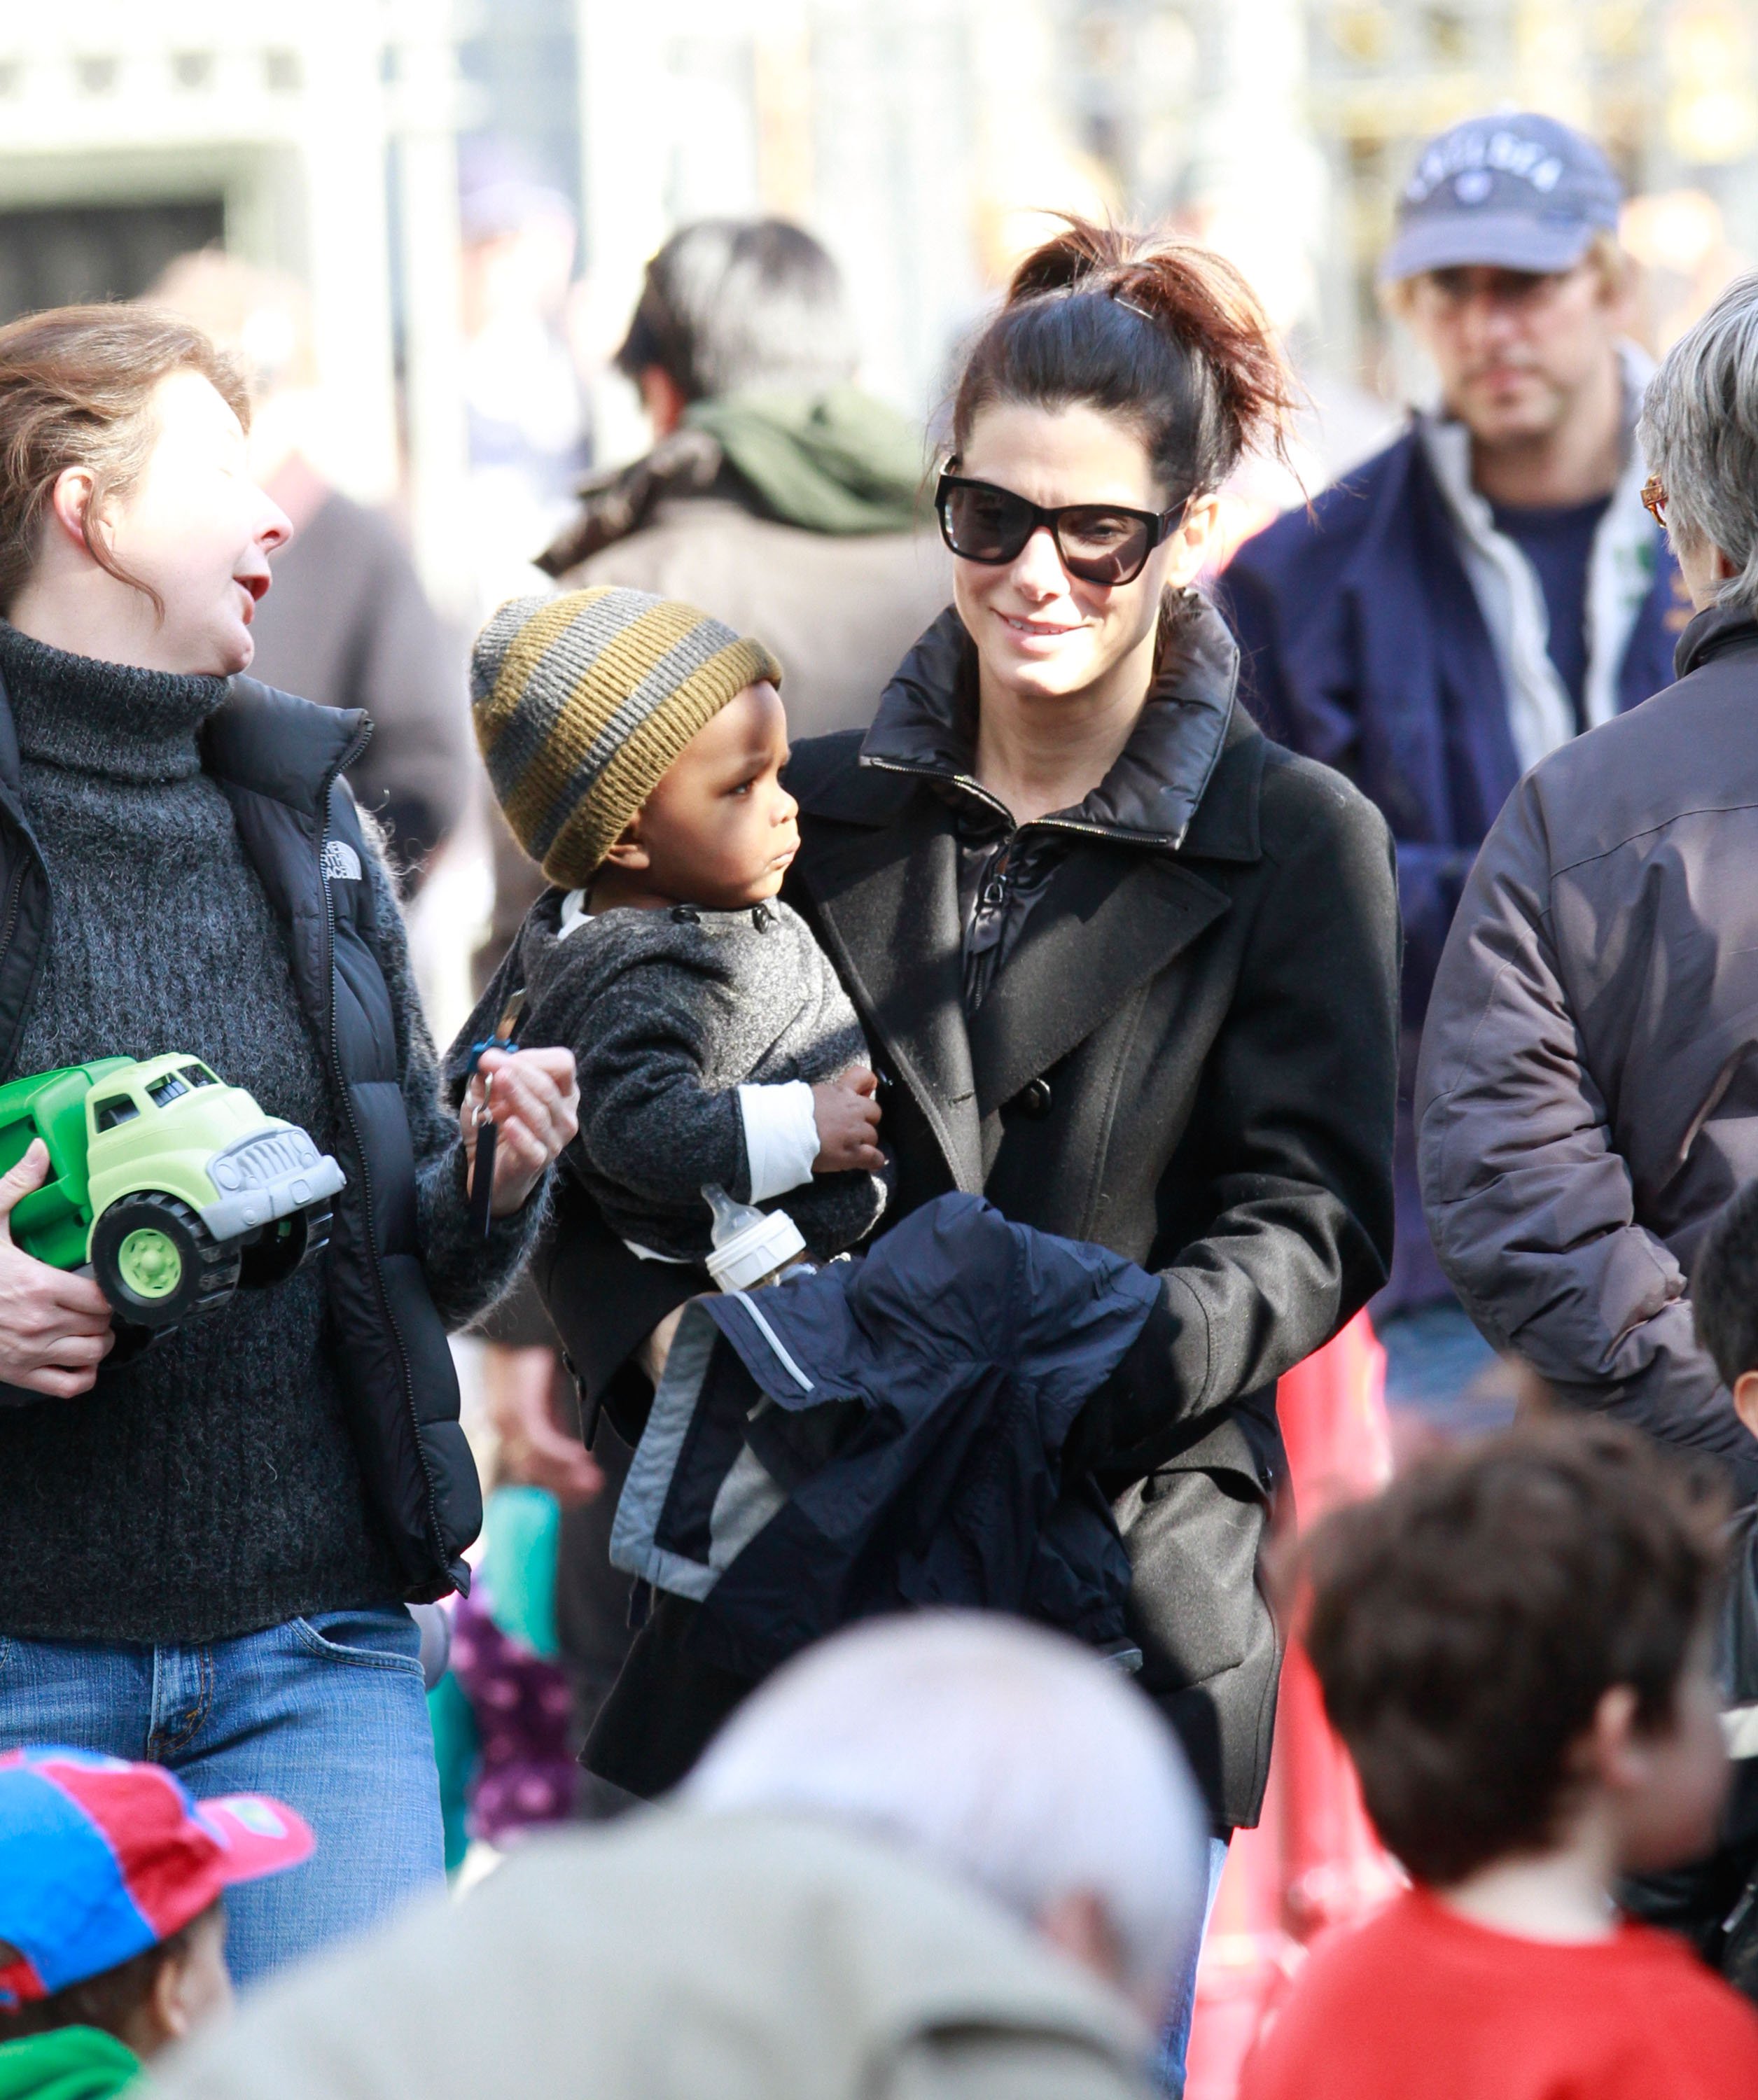 Sandra Bullock and son Louis Bullock pictured in Manhattan on March 20, 2011 in New York City. / Source: Getty Images